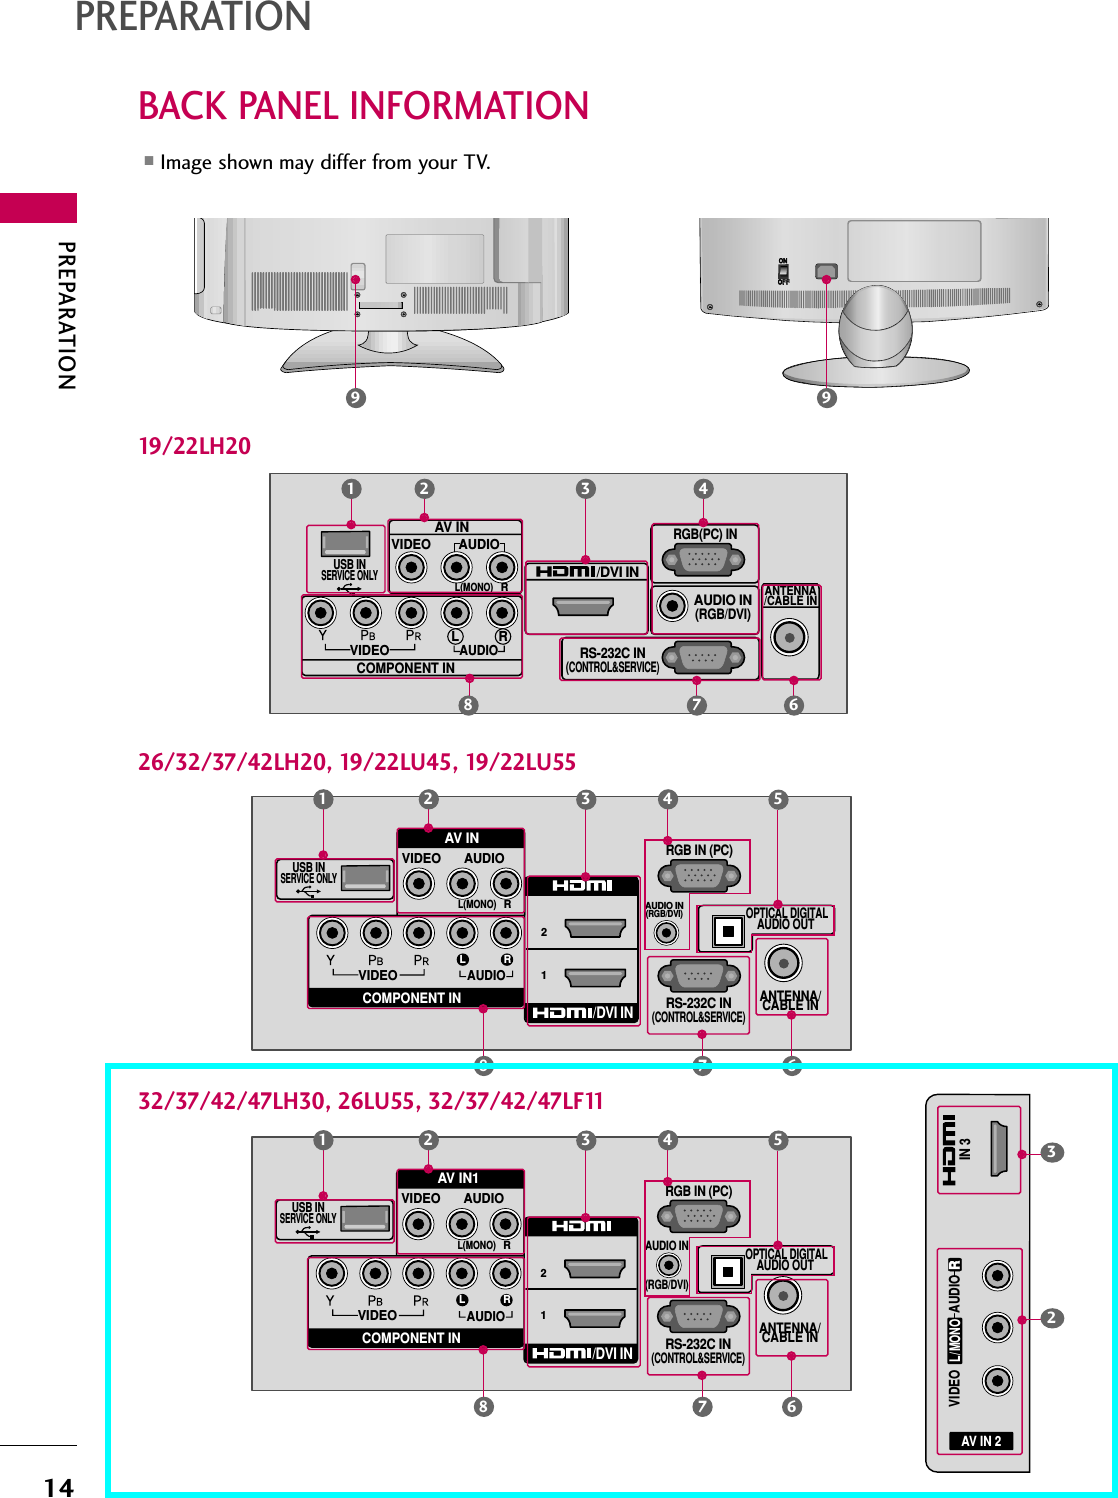 PREPARATION14BACK PANEL INFORMATIONPREPARATION■Image shown may differ from your TV.RS-232C IN(CONTROL&amp;SERVICE)AUDIO IN(RGB/DVI)ANTENNA/CABLE INVIDEOAUDIOL RRGB(PC) IN/DVI INAV INVIDEO AUDIOL(MONO)RCOMPONENT INUSB INSERVICE ONLY21 43AV IN 2L/MONORAUDIOVIDEOIN 323USB INSERVICE ONLYRS-232C IN(CONTROL&amp;SERVICE)AUDIO IN(RGB/DVI)ANTENNA/CABLE INVIDEOAUDIORGB IN (PC)VIDEO AUDIOL(MONO)R21L ROPTICAL DIGITALAUDIO OUT /DVI INCOMPONENT INAV IN21326/32/37/42LH20, 19/22LU45, 19/22LU5519/22LH20457 6832/37/42/47LH30, 26LU55, 32/37/42/47LF117 689❖◆❖◆❖❋❋❖❋❋USB INSERVICE ONLYRS-232C IN(CONTROL&amp;SERVICE)AUDIO IN(RGB/DVI)ANTENNA/CABLE INVIDEOAUDIORGB IN (PC)VIDEO AUDIOL(MONO)R21L ROPTICAL DIGITALAUDIO OUT /DVI INCOMPONENT INAV IN1R213457 689